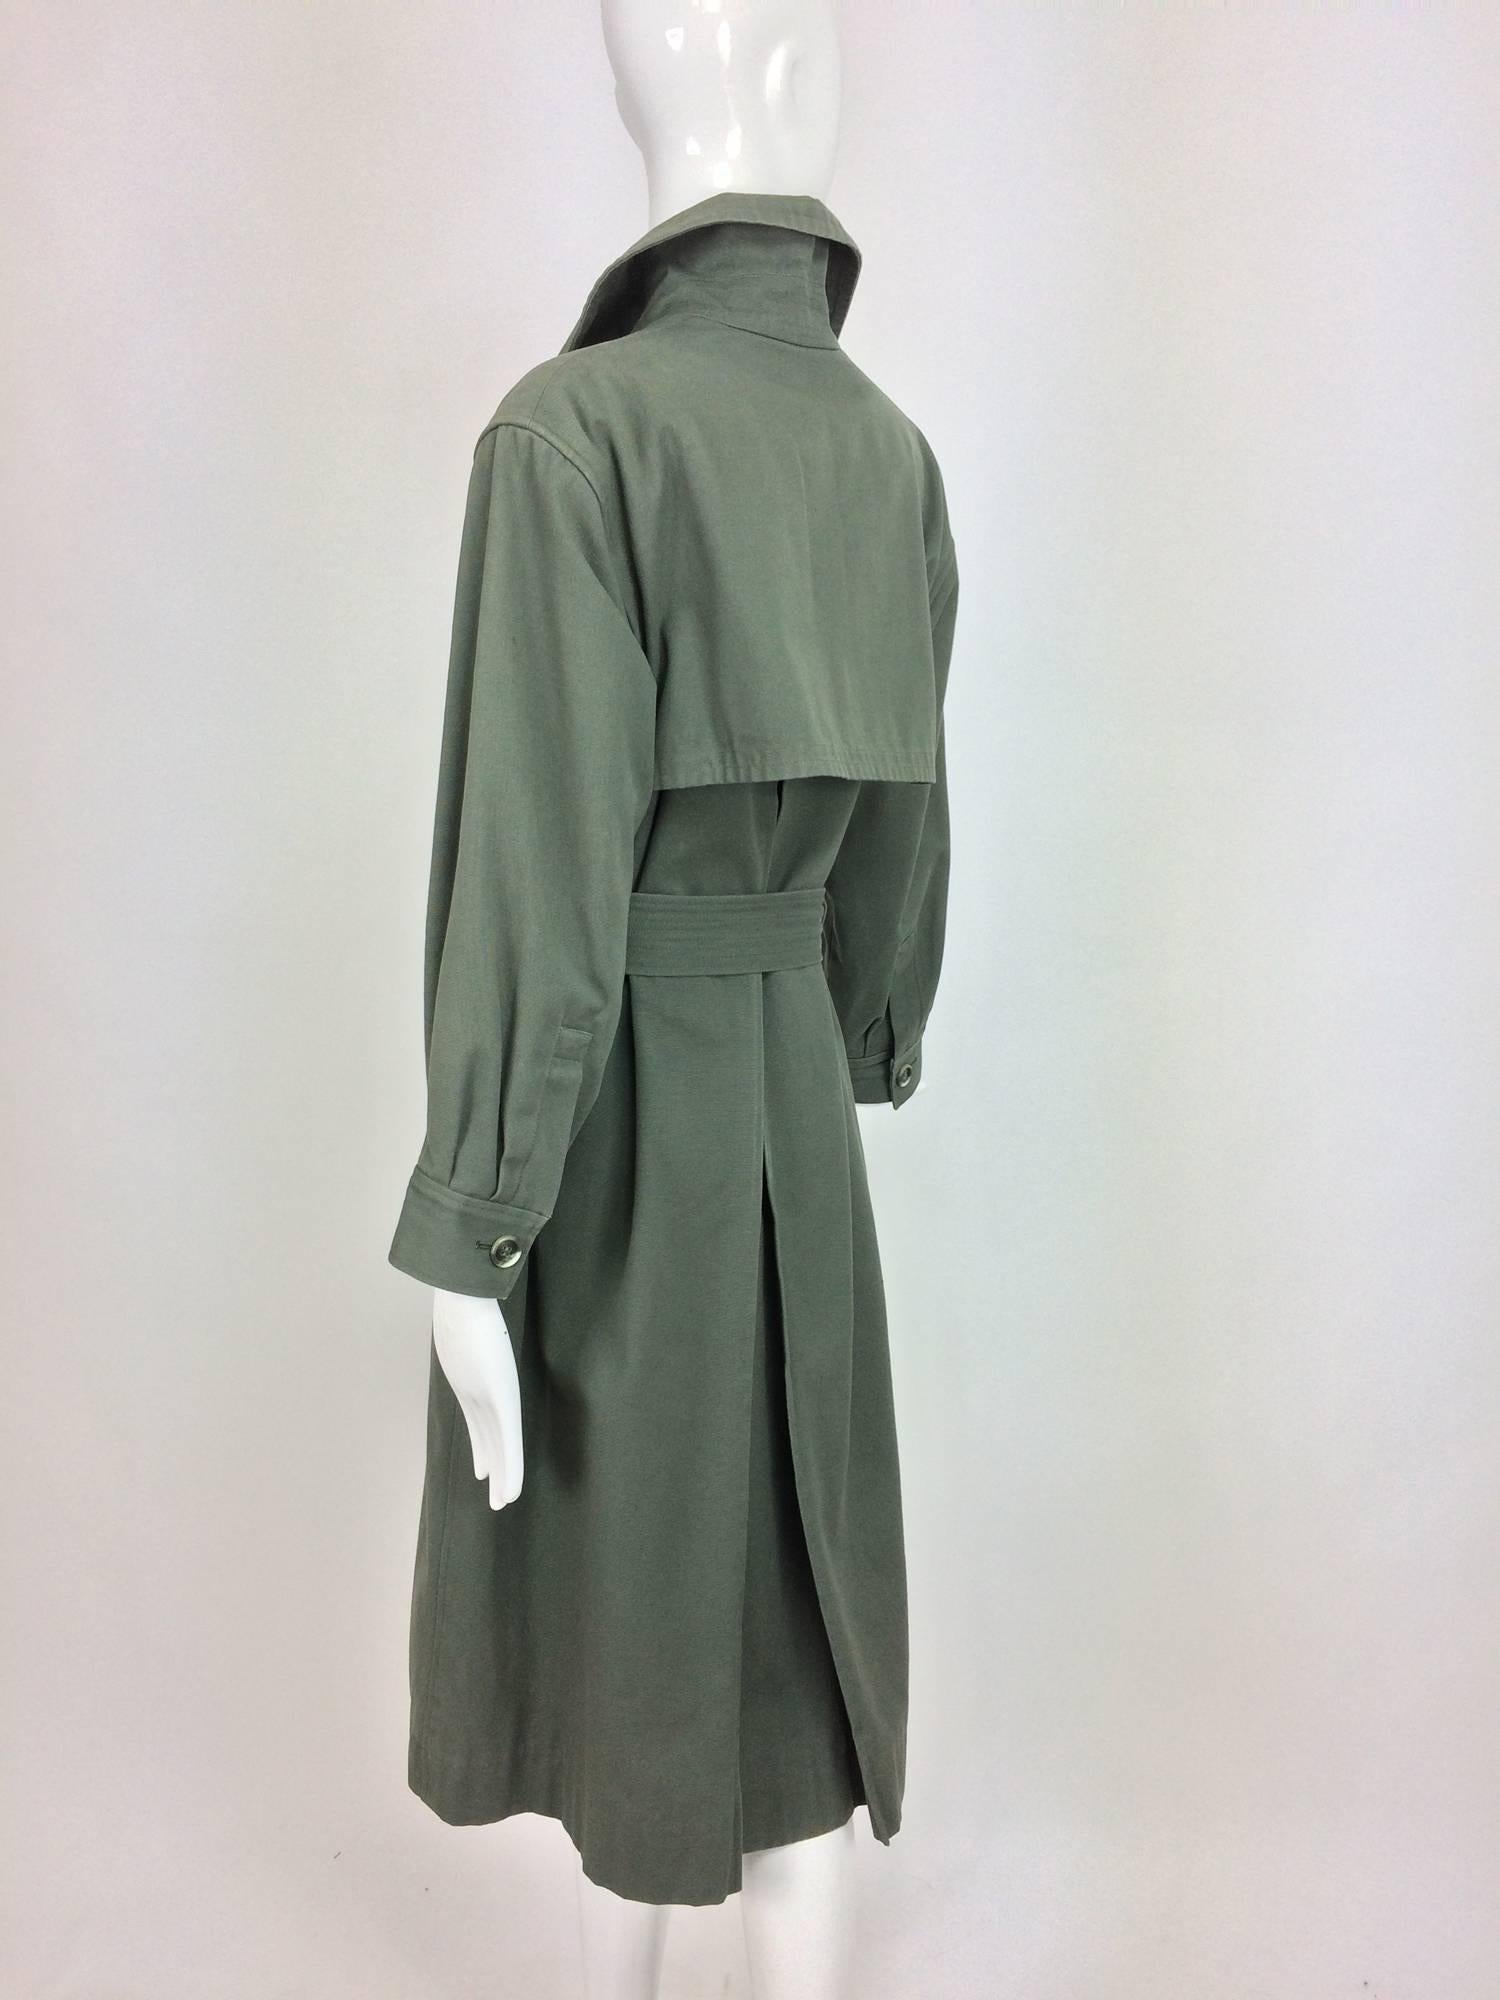 Vintage rare Yves St Laurent military green canvas trench coat 1970s 3